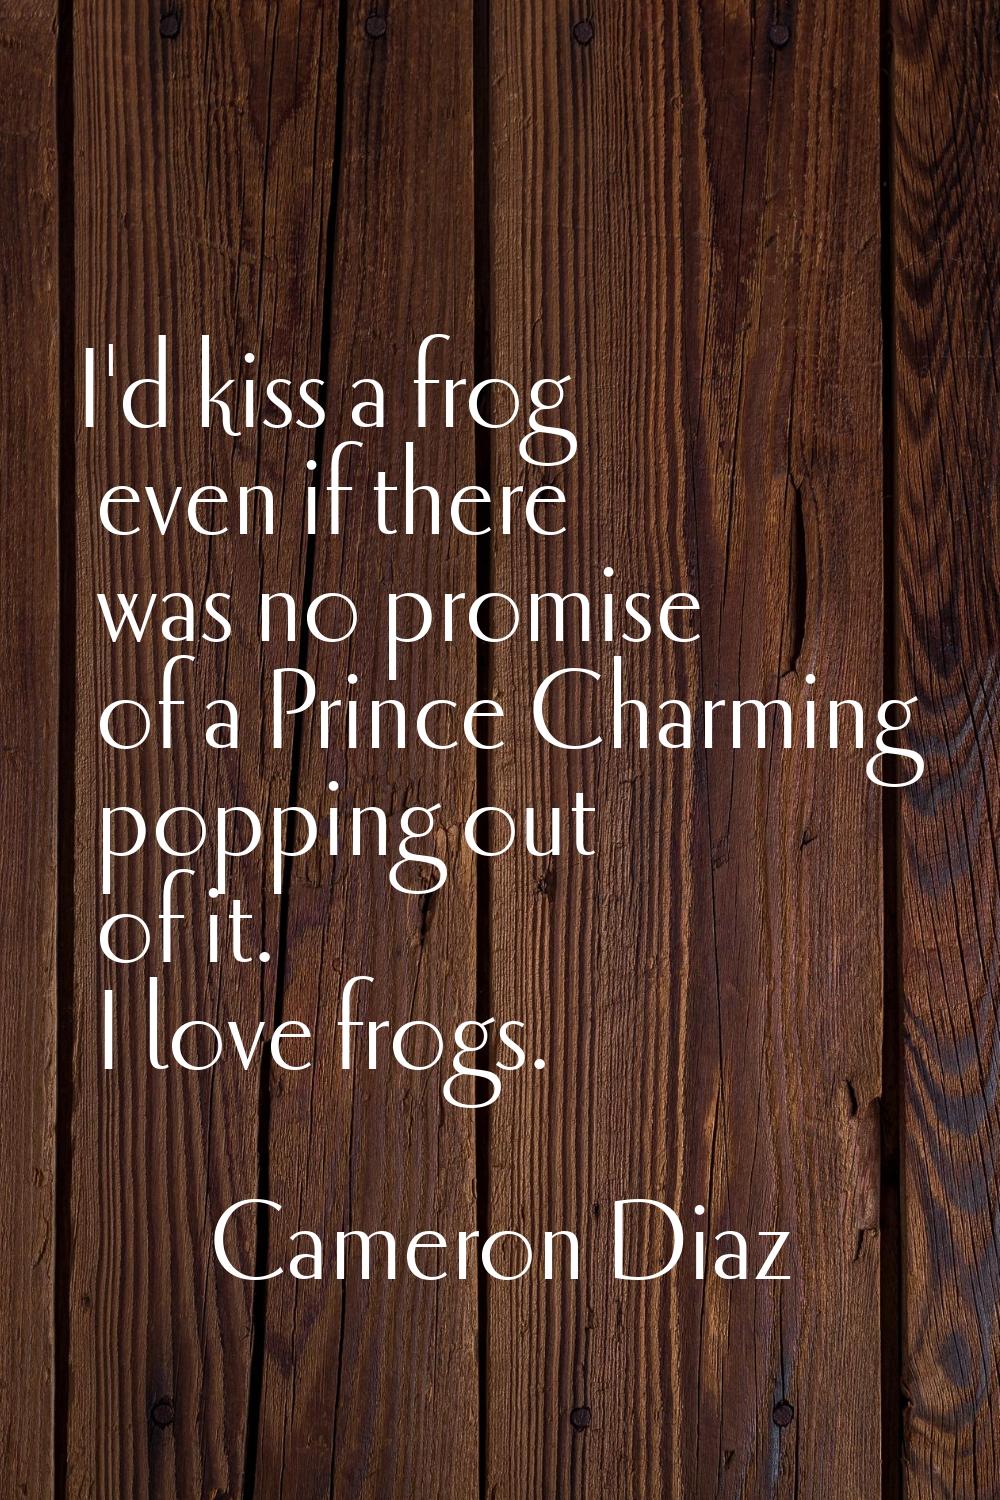 I'd kiss a frog even if there was no promise of a Prince Charming popping out of it. I love frogs.